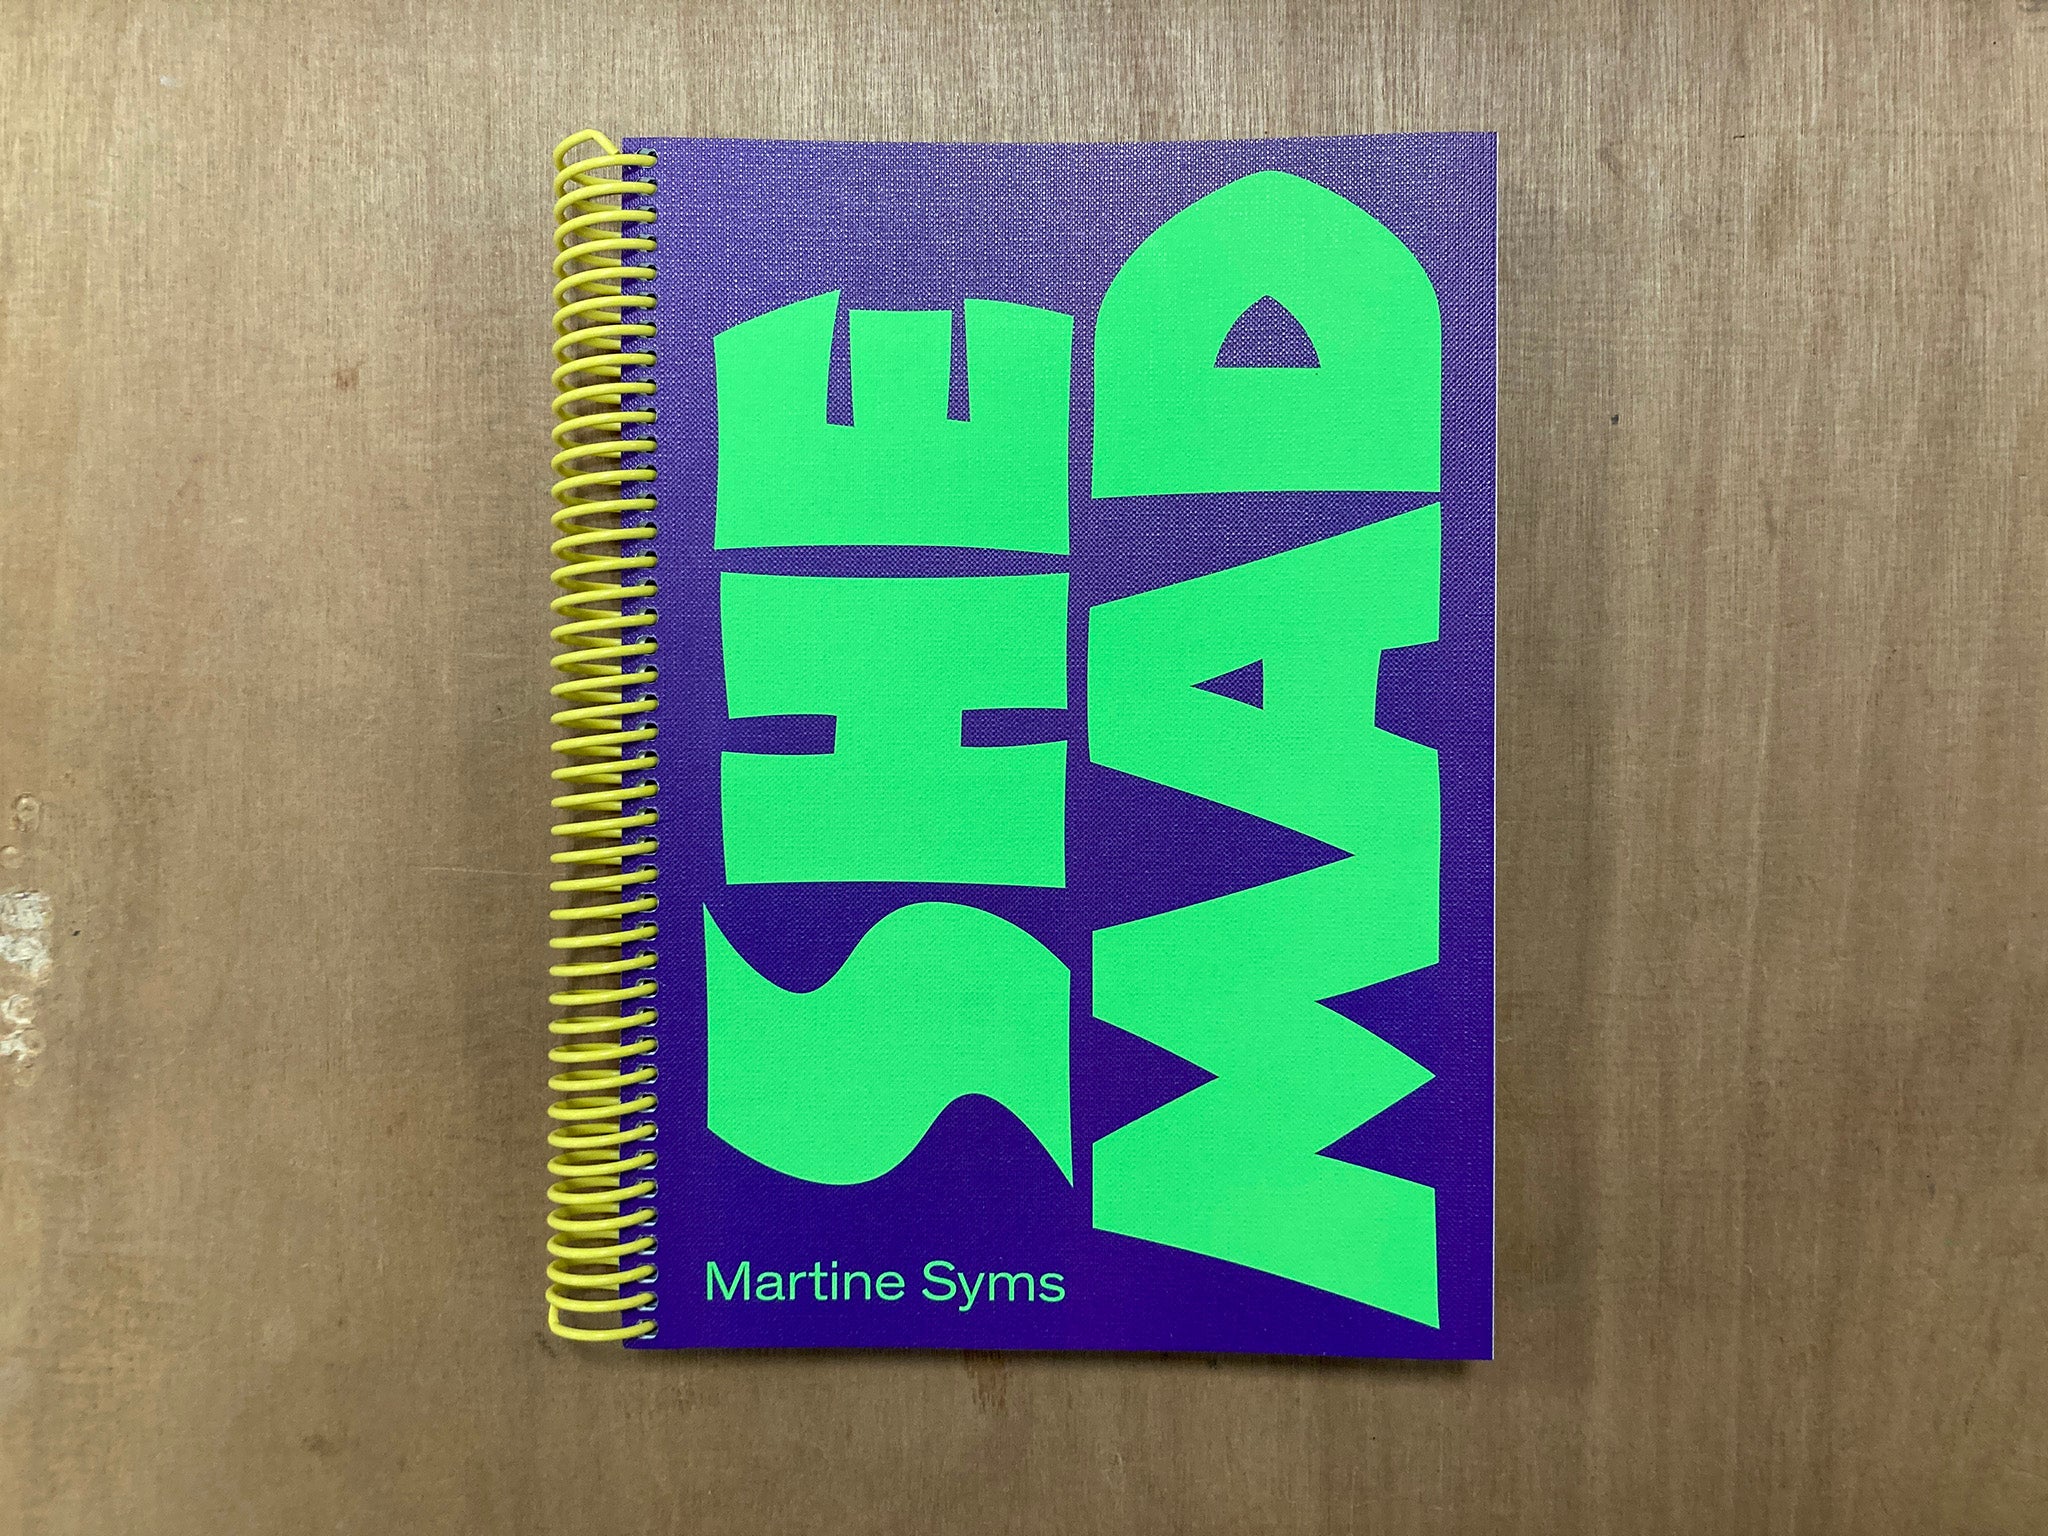 SHE MAD by Martine Syms